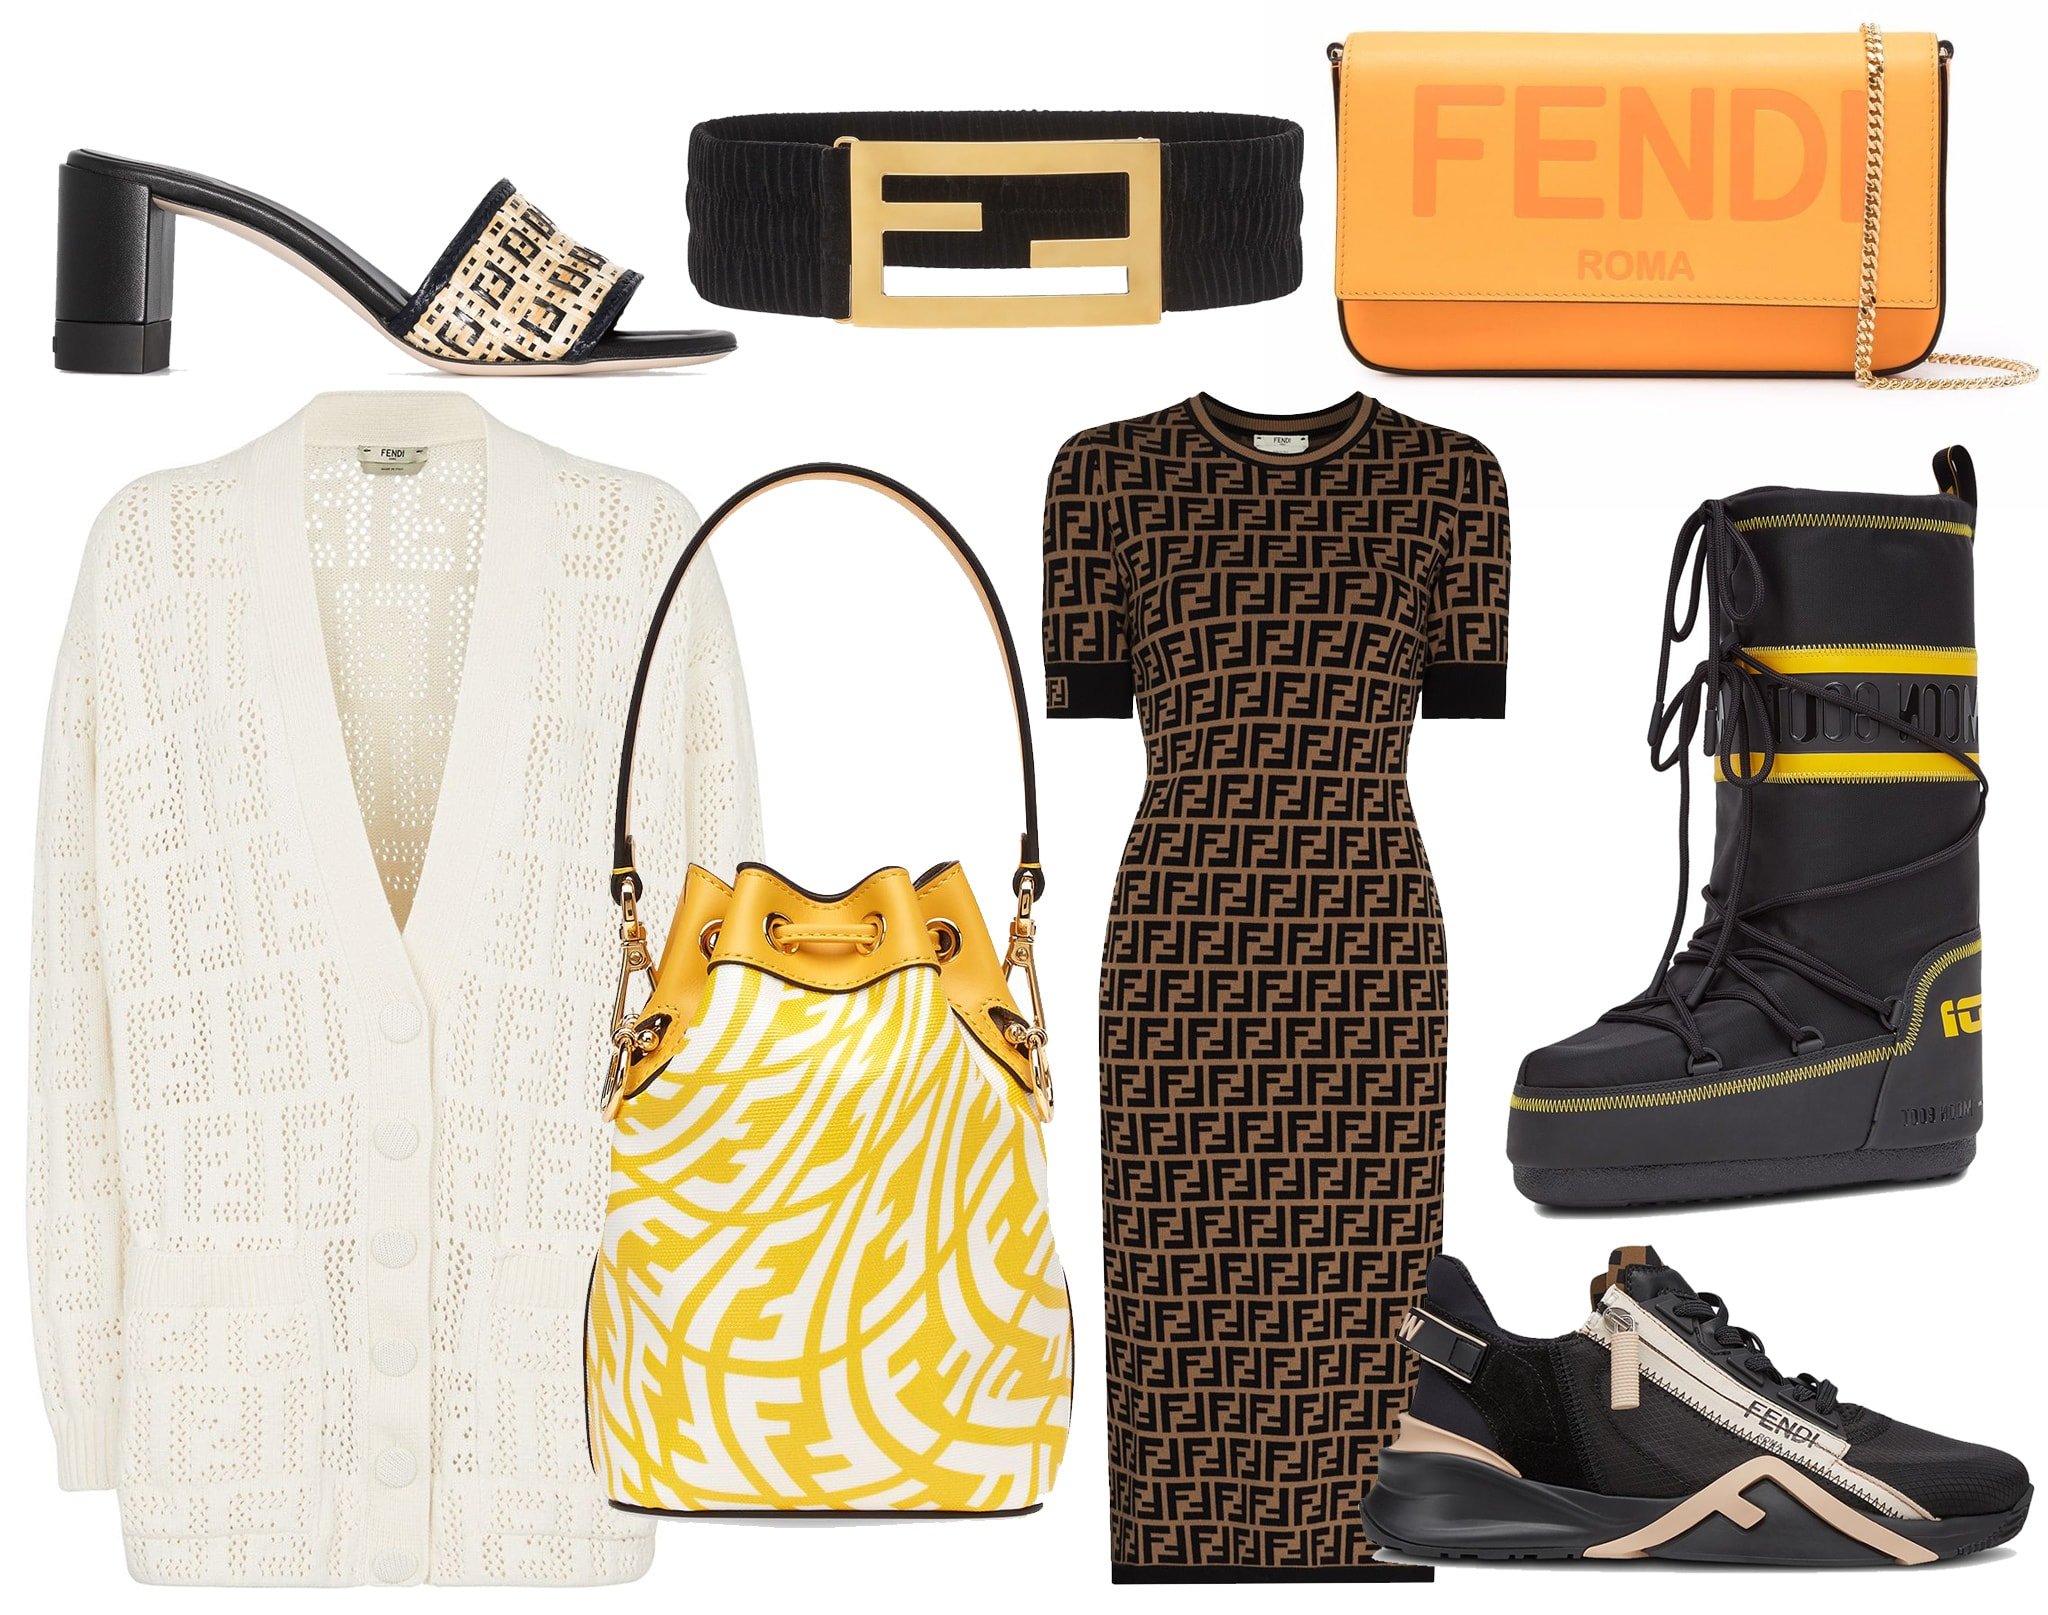 You'll find the signature double F logo design on almost every Fendi fashion piece